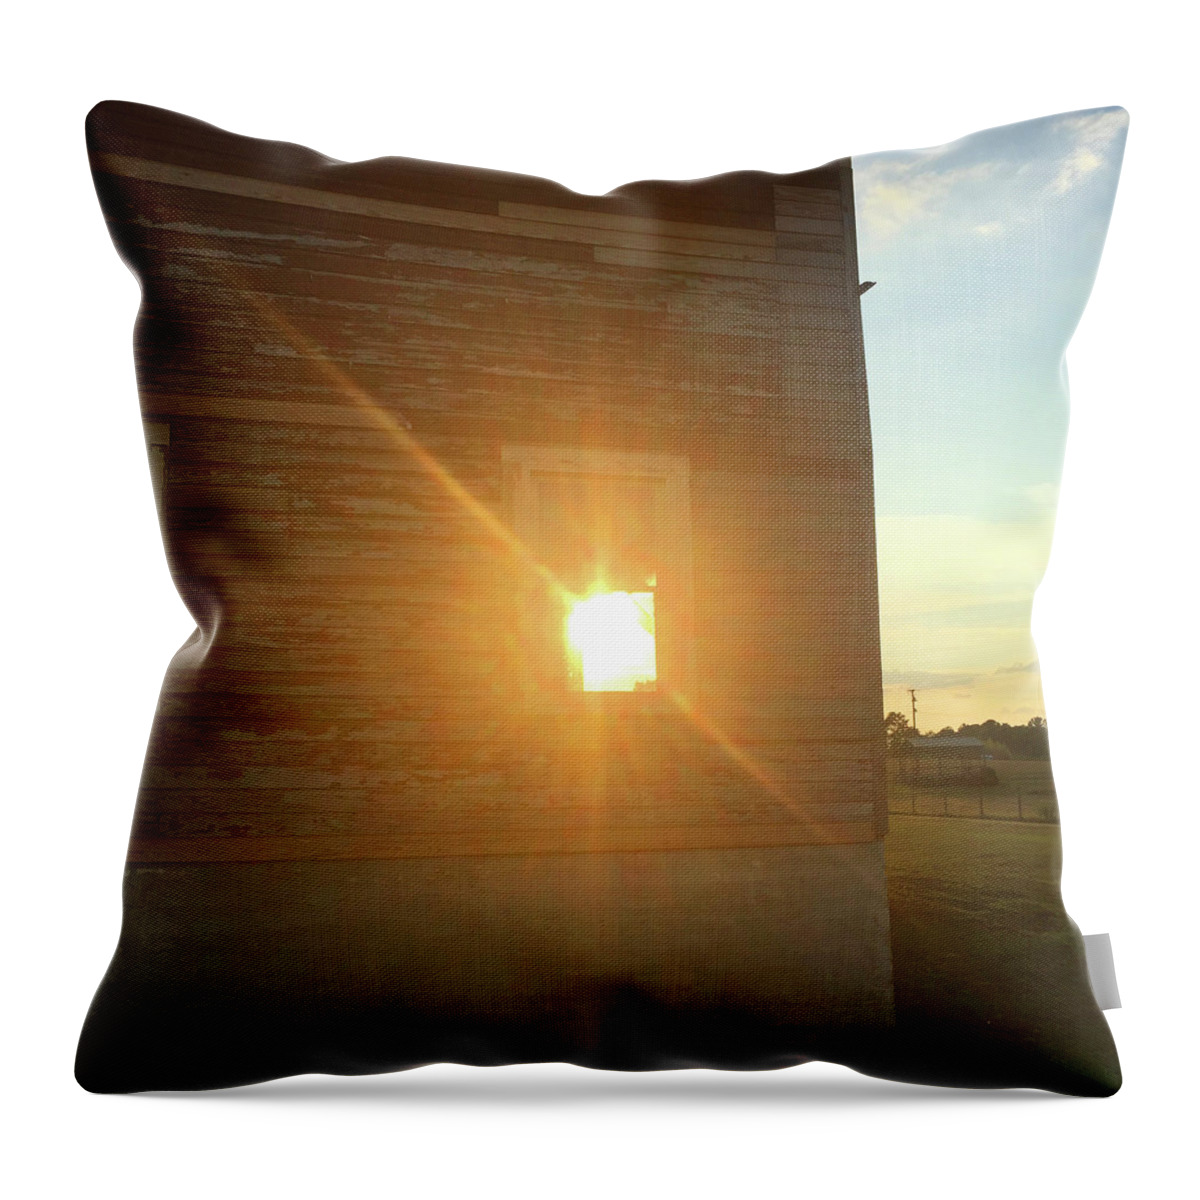 Sunset Throw Pillow featuring the photograph Psalm 113 3 by Matthew Seufer